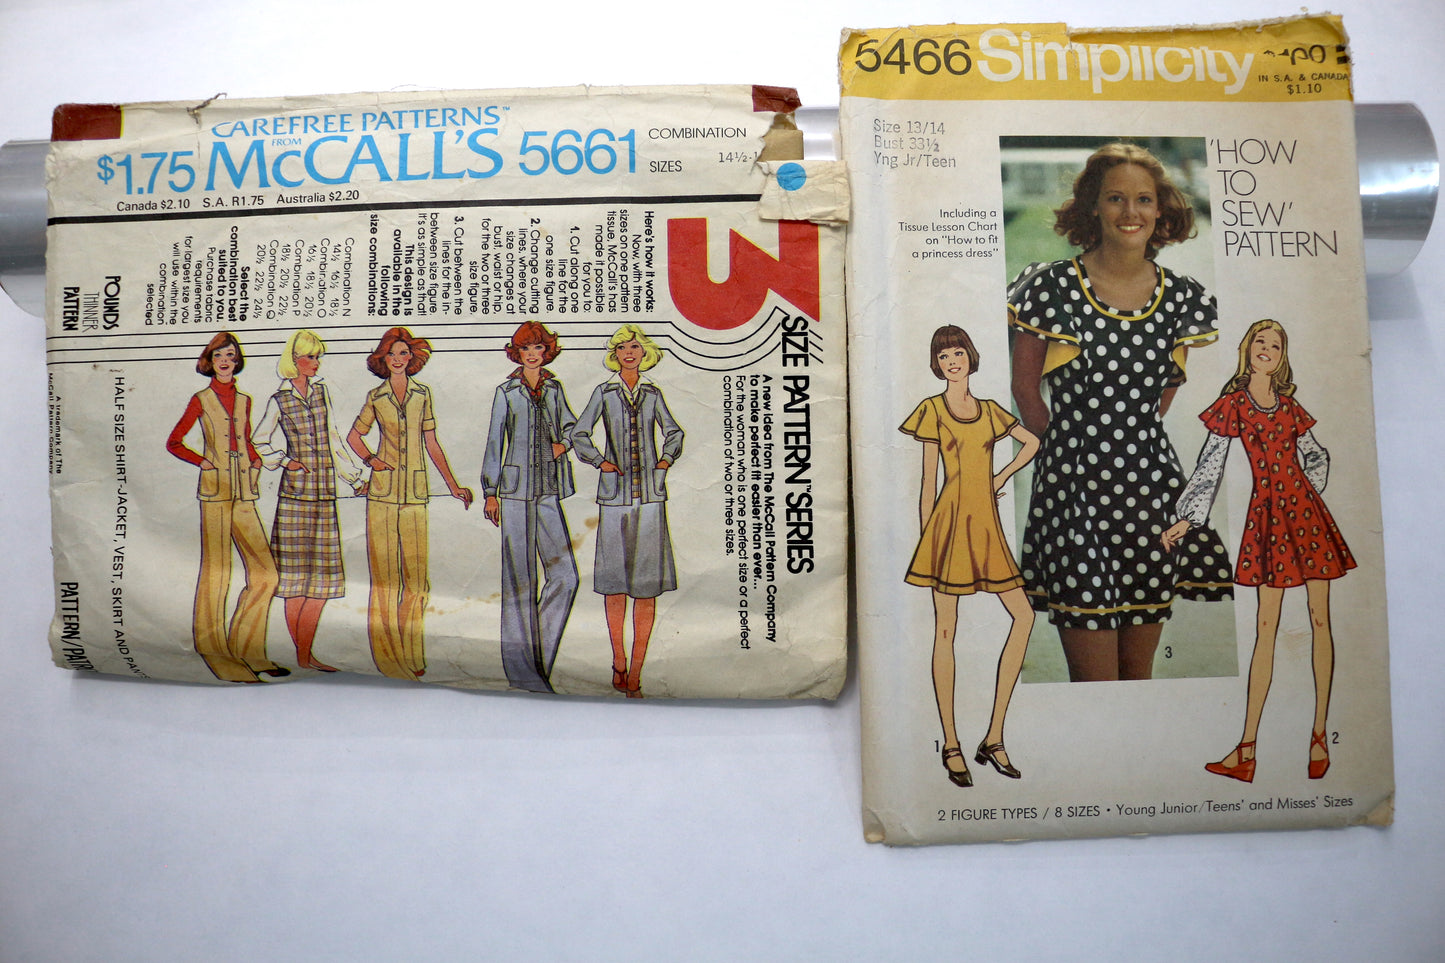 McCalls 5661 Sewing Pattern or Simplicity 5466 Sewing Pattern